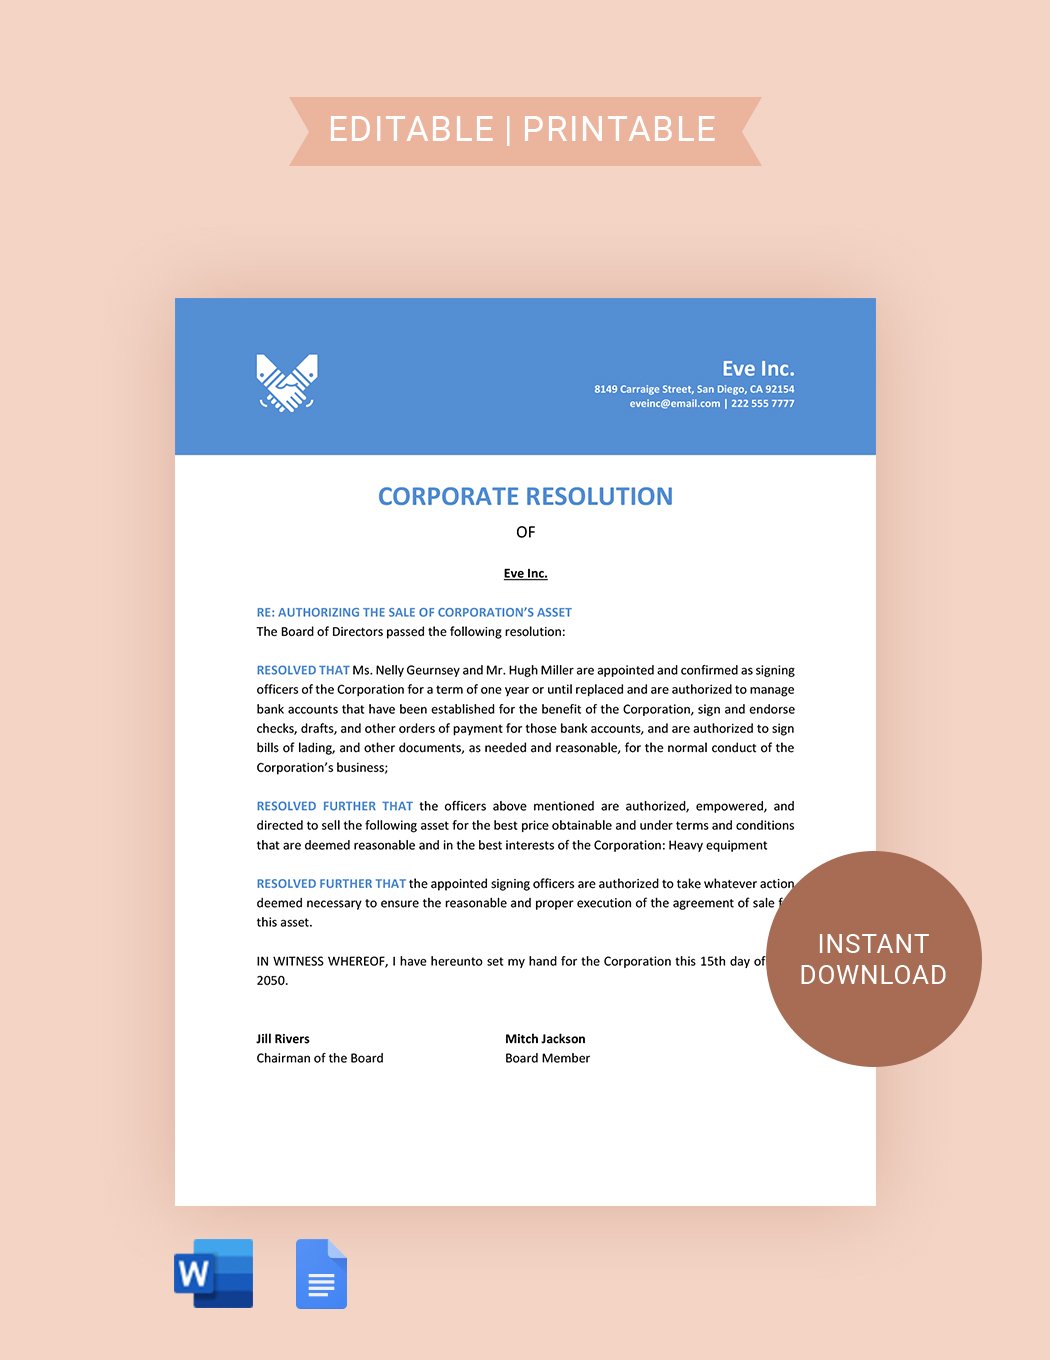 Simple Corporate Resolution Template in Word, Google Docs